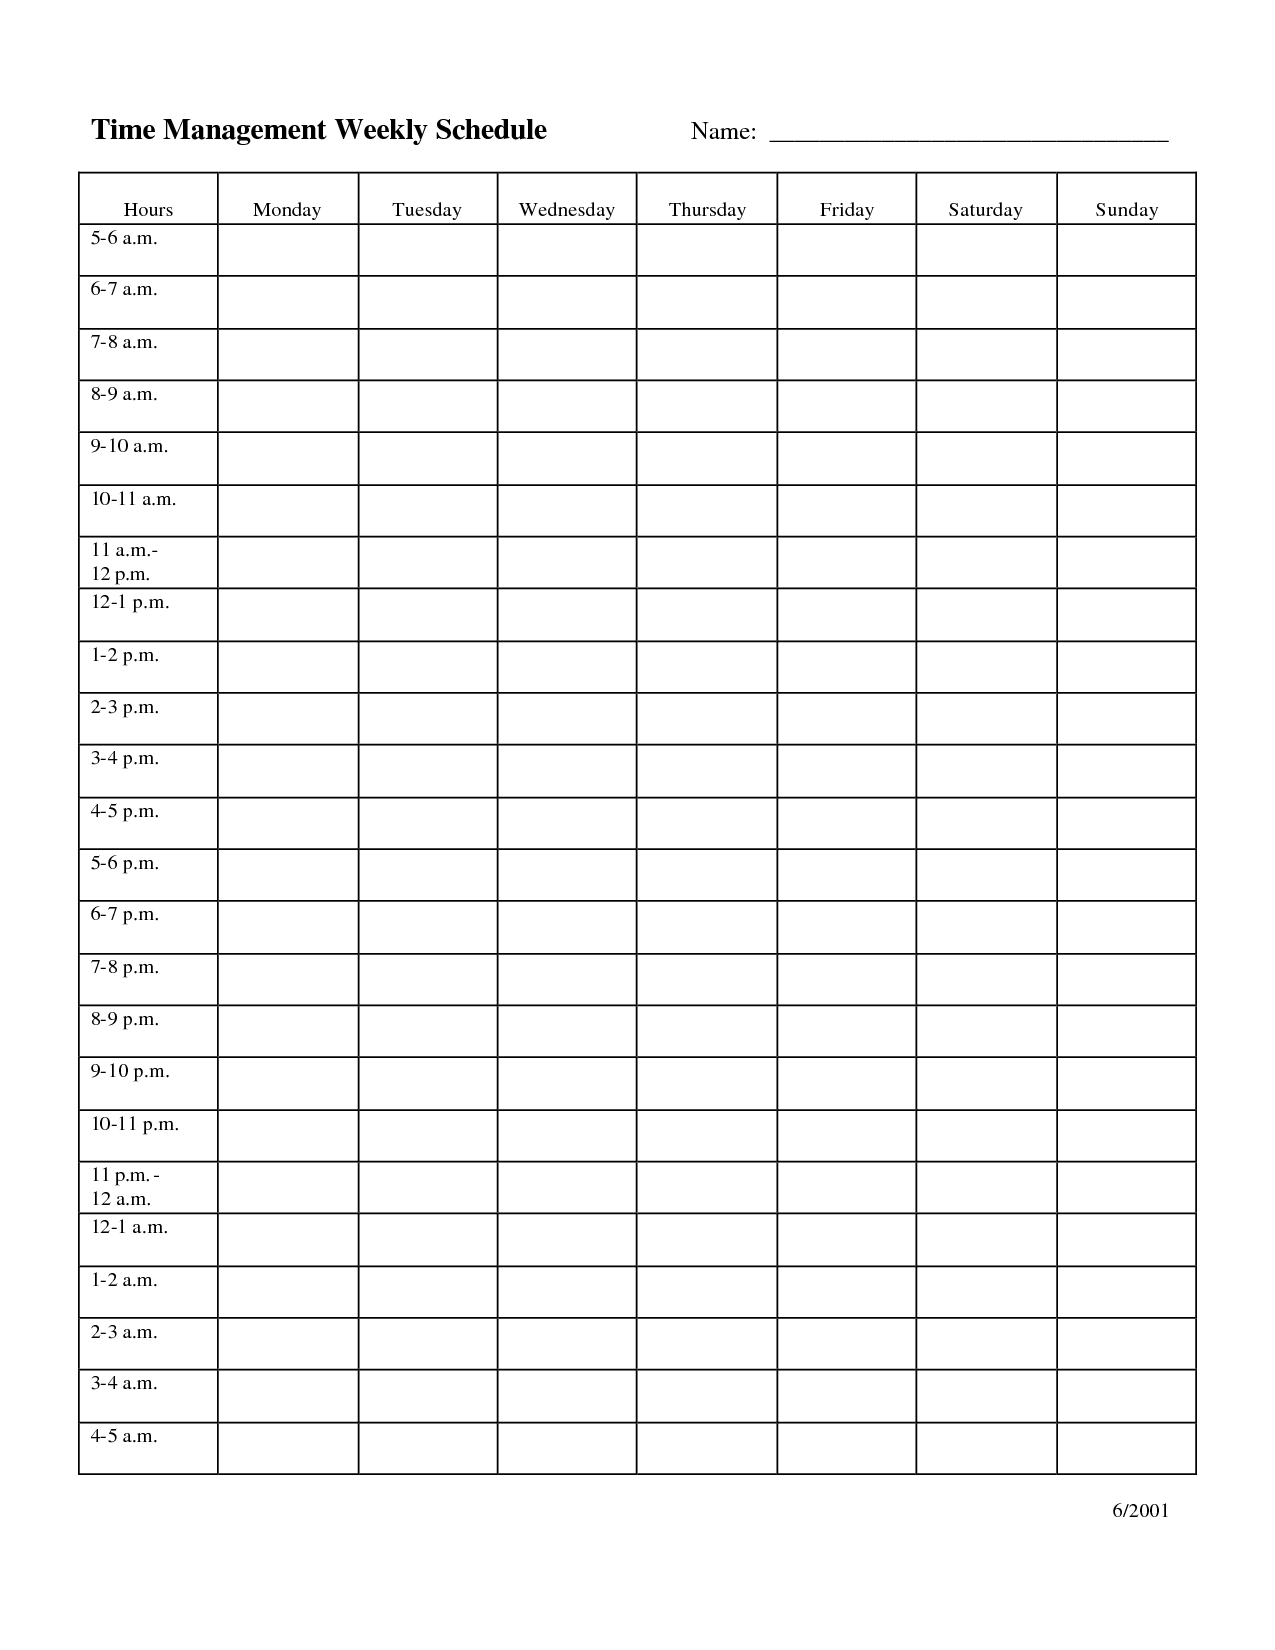 Time Management Weekly Schedule Template … | Bobbies Wish List | Sched… throughout Blank Weekly Schedule With Times